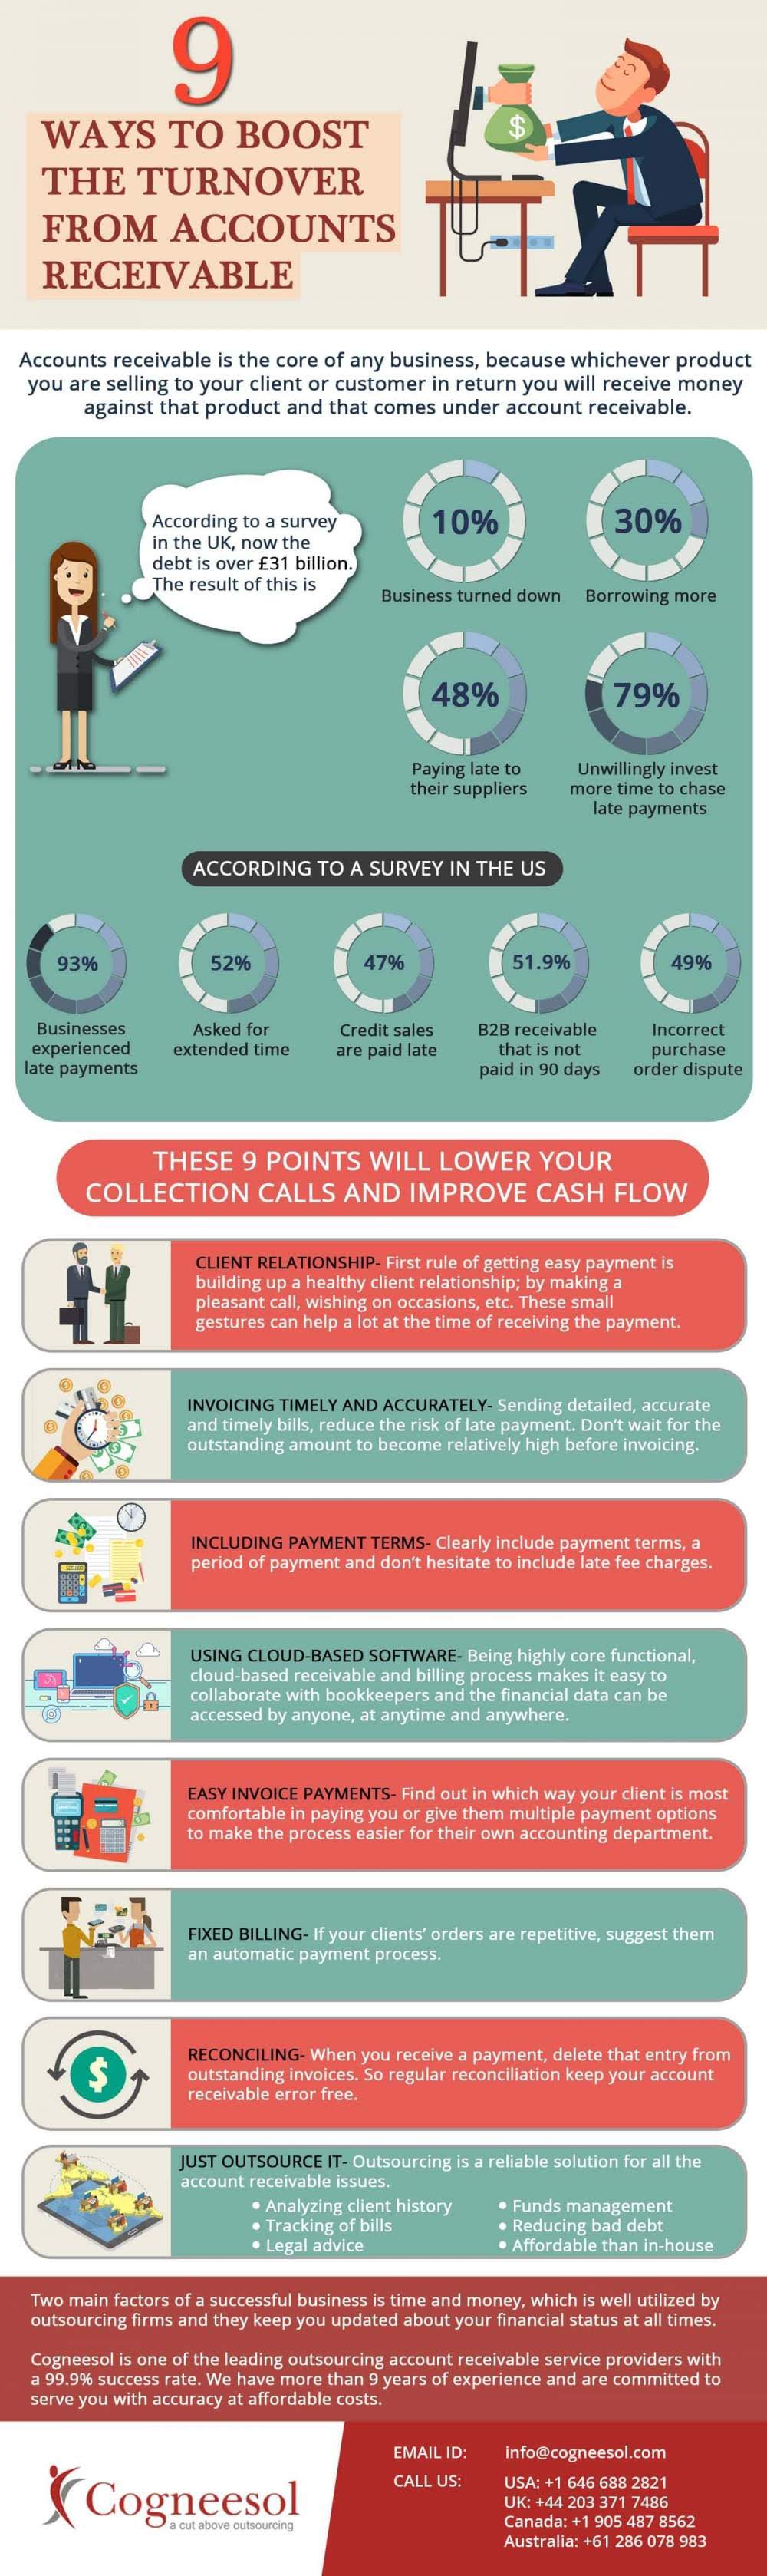 9 Ways to Boost The Turnover from Account Receivable #infographic